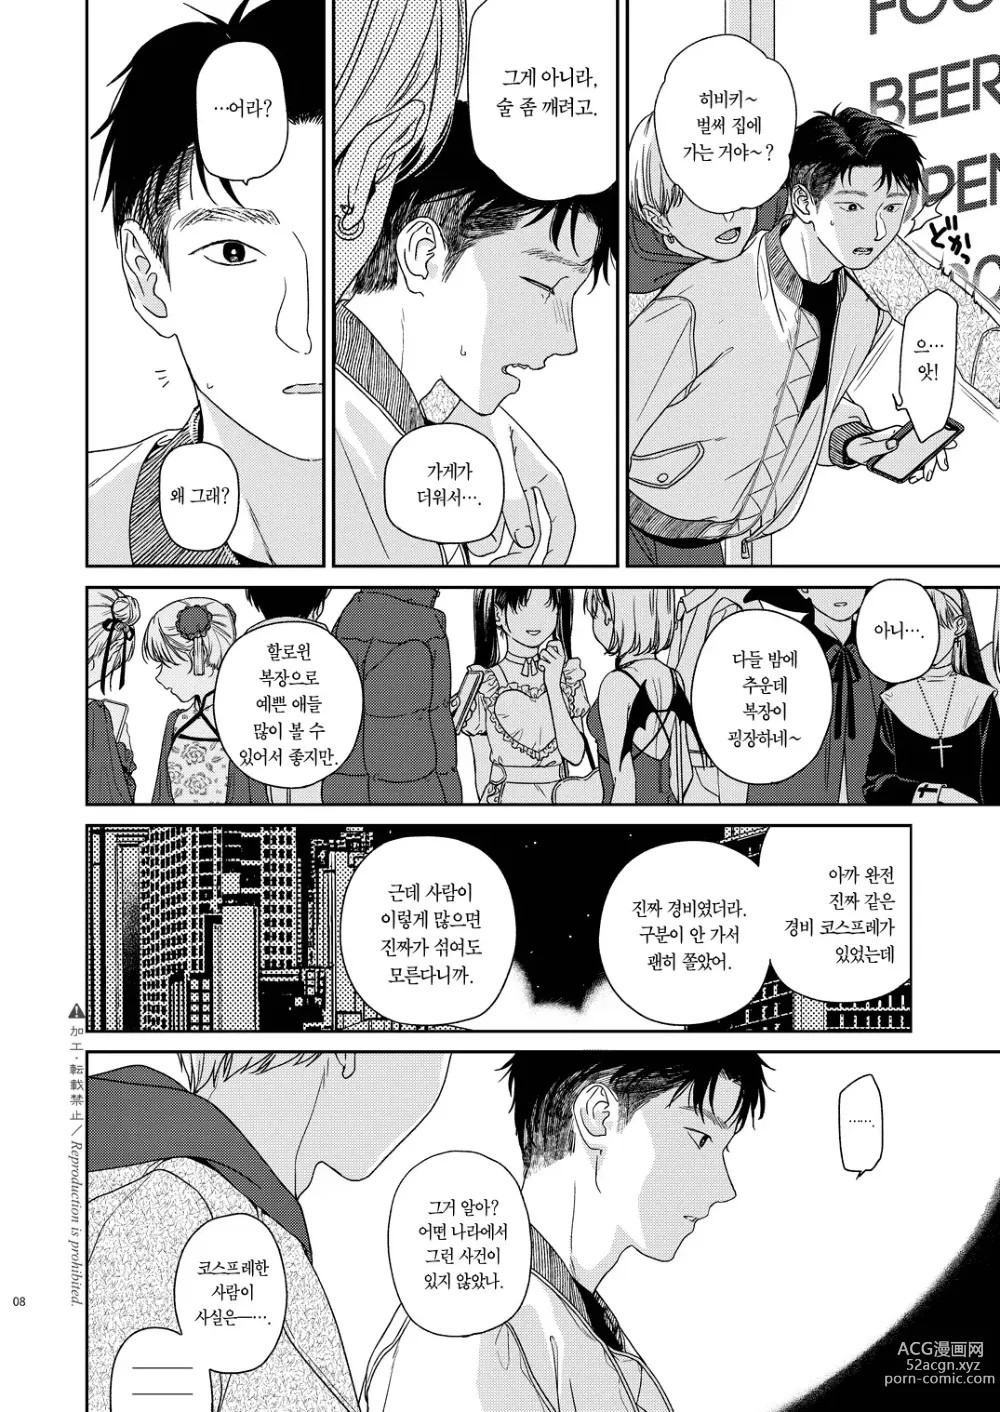 Page 9 of doujinshi 카타미와 월맹